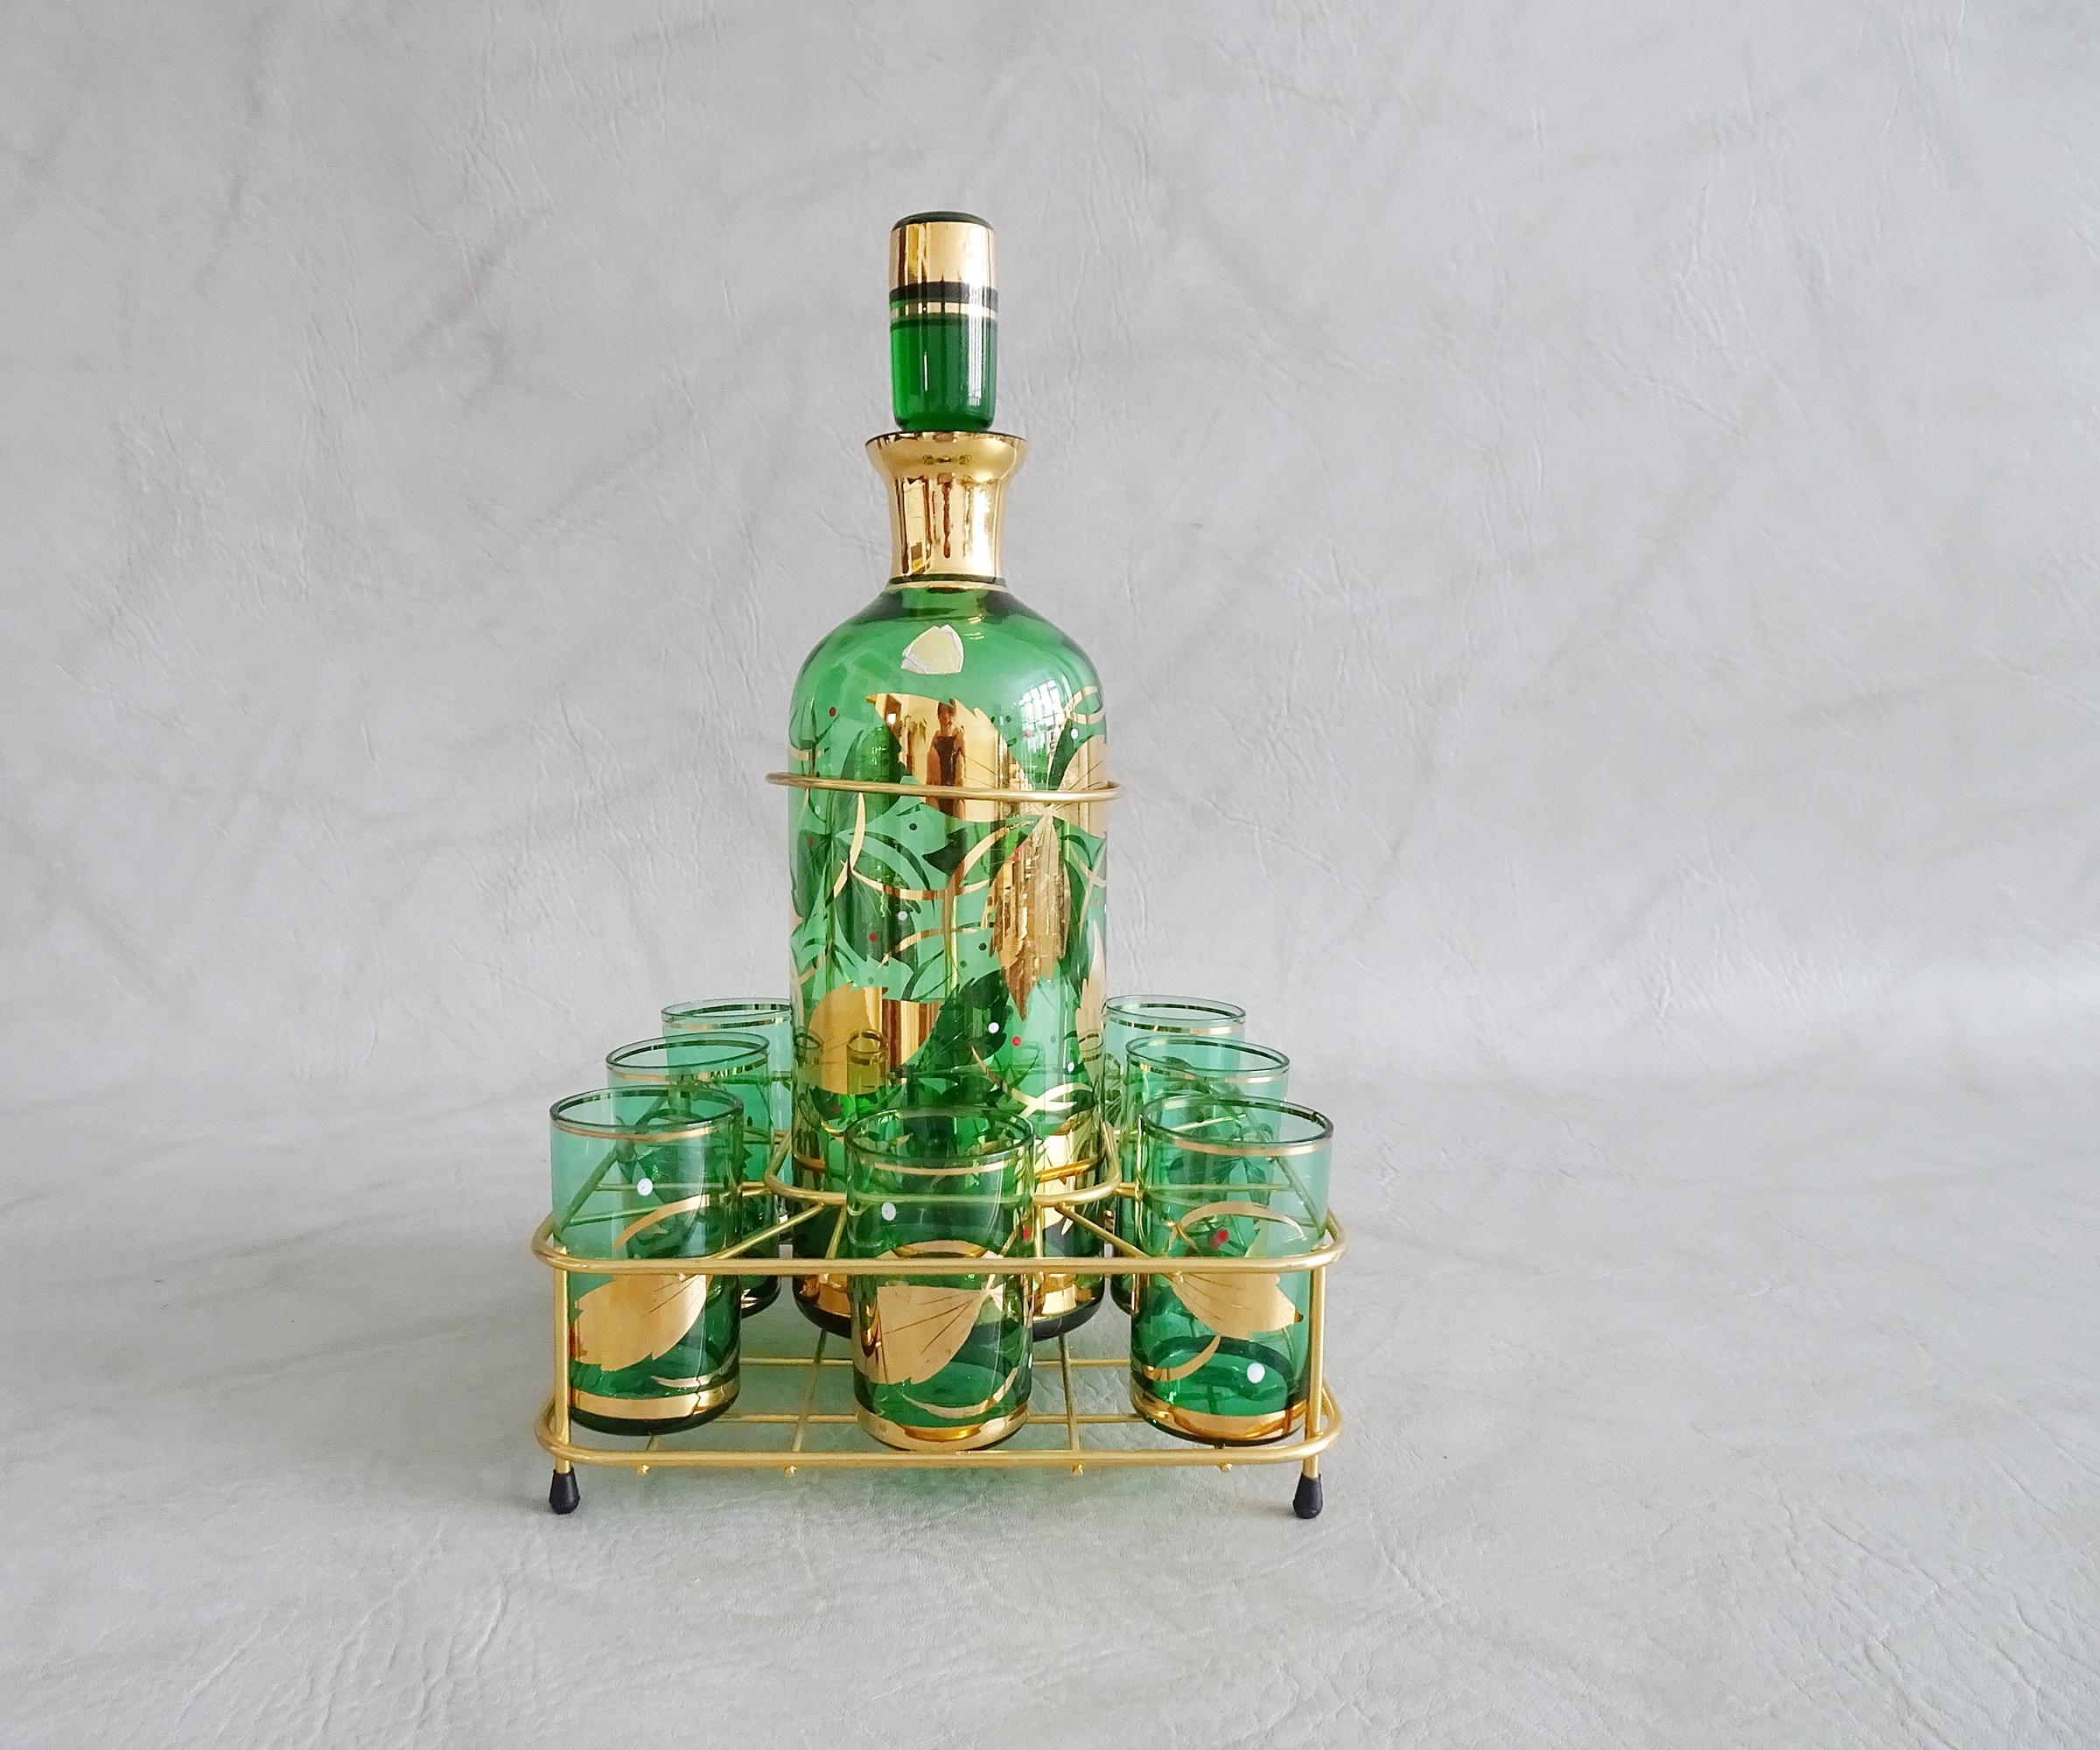 Genuine Bohemian glasses set with a decanter in a gold-colored stand. A stylish mid-century Czech glass art piece. Green glass with golden foliage and small enameled dots in white and red.

A fancy bar accessory consisting of eight glasses and a